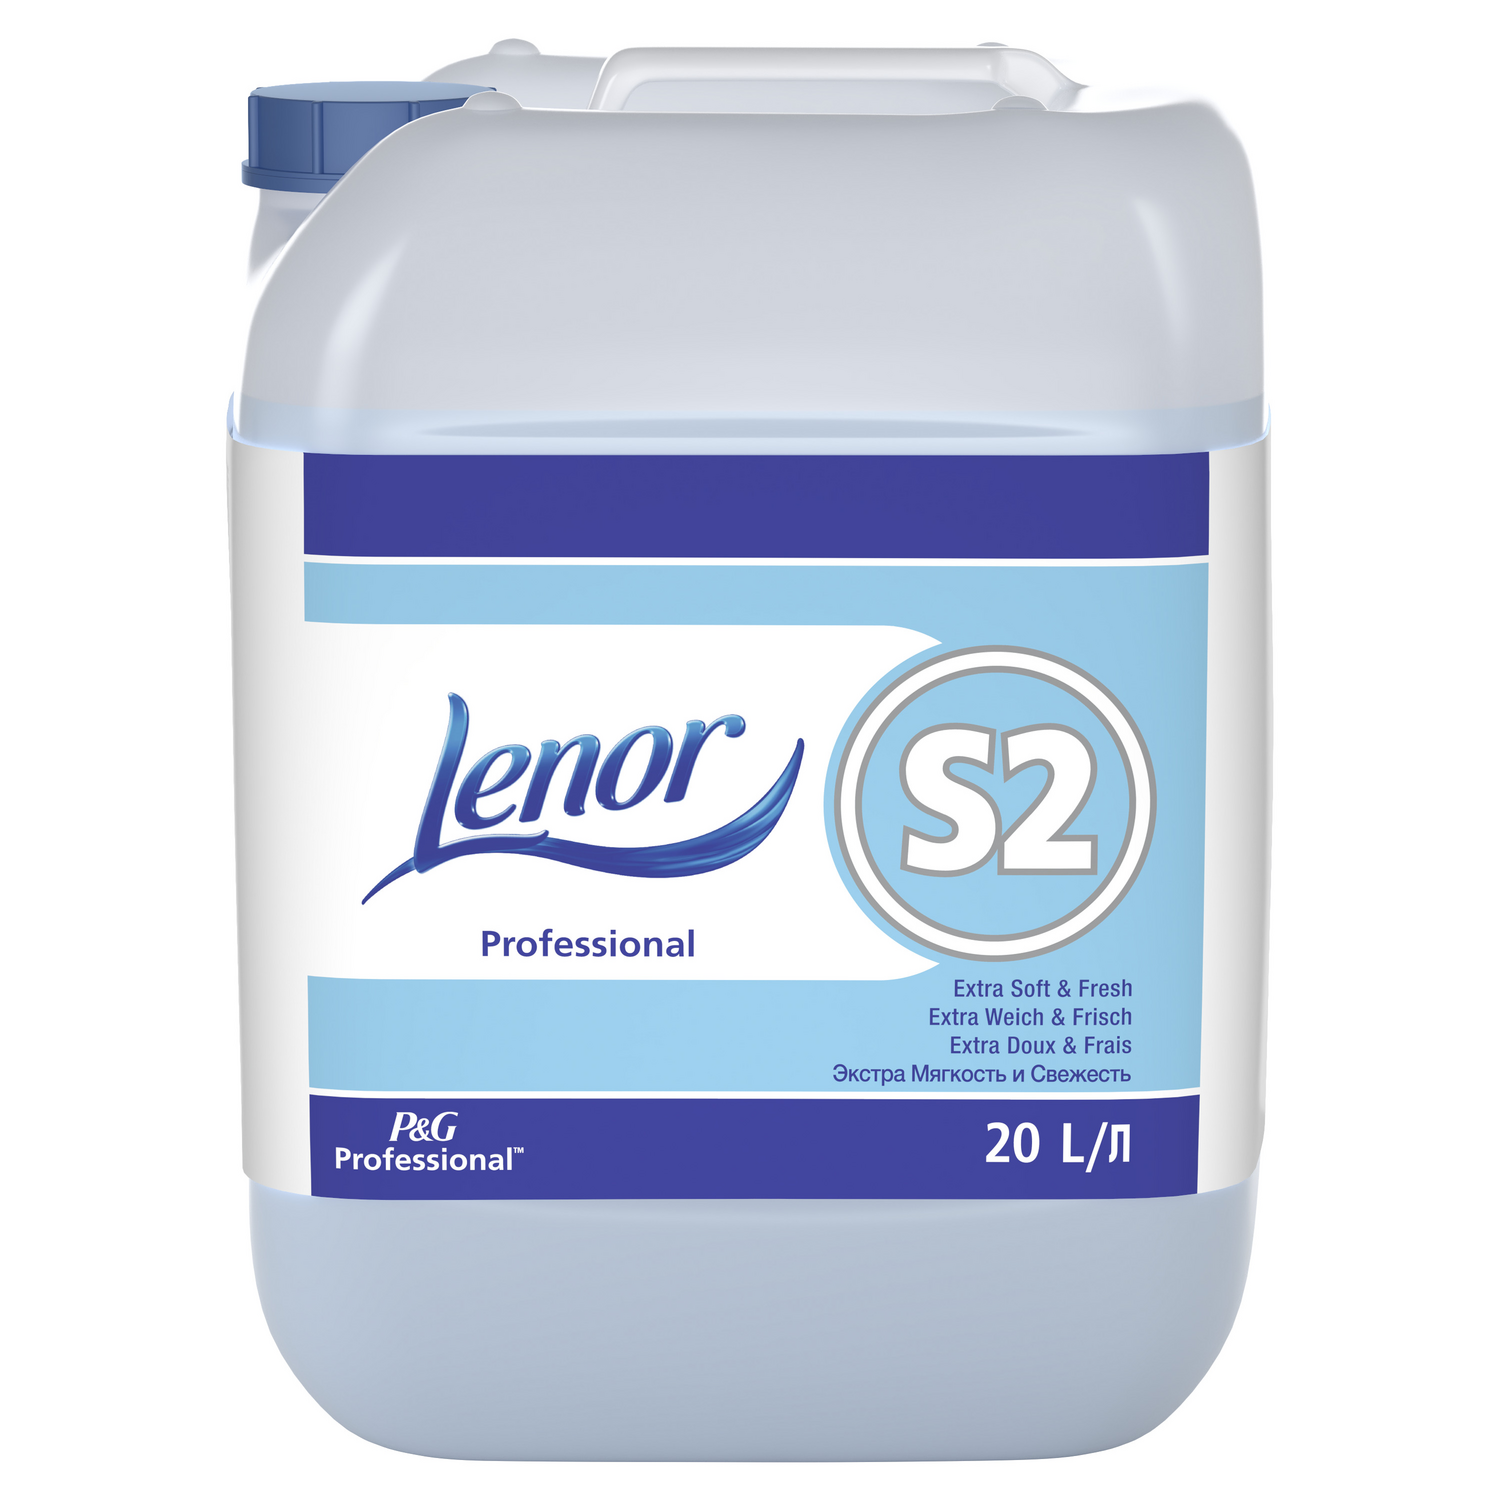 P&G PROFESSIONAL LENOR S2 Extra Weich & Frisch Kanister 20 L